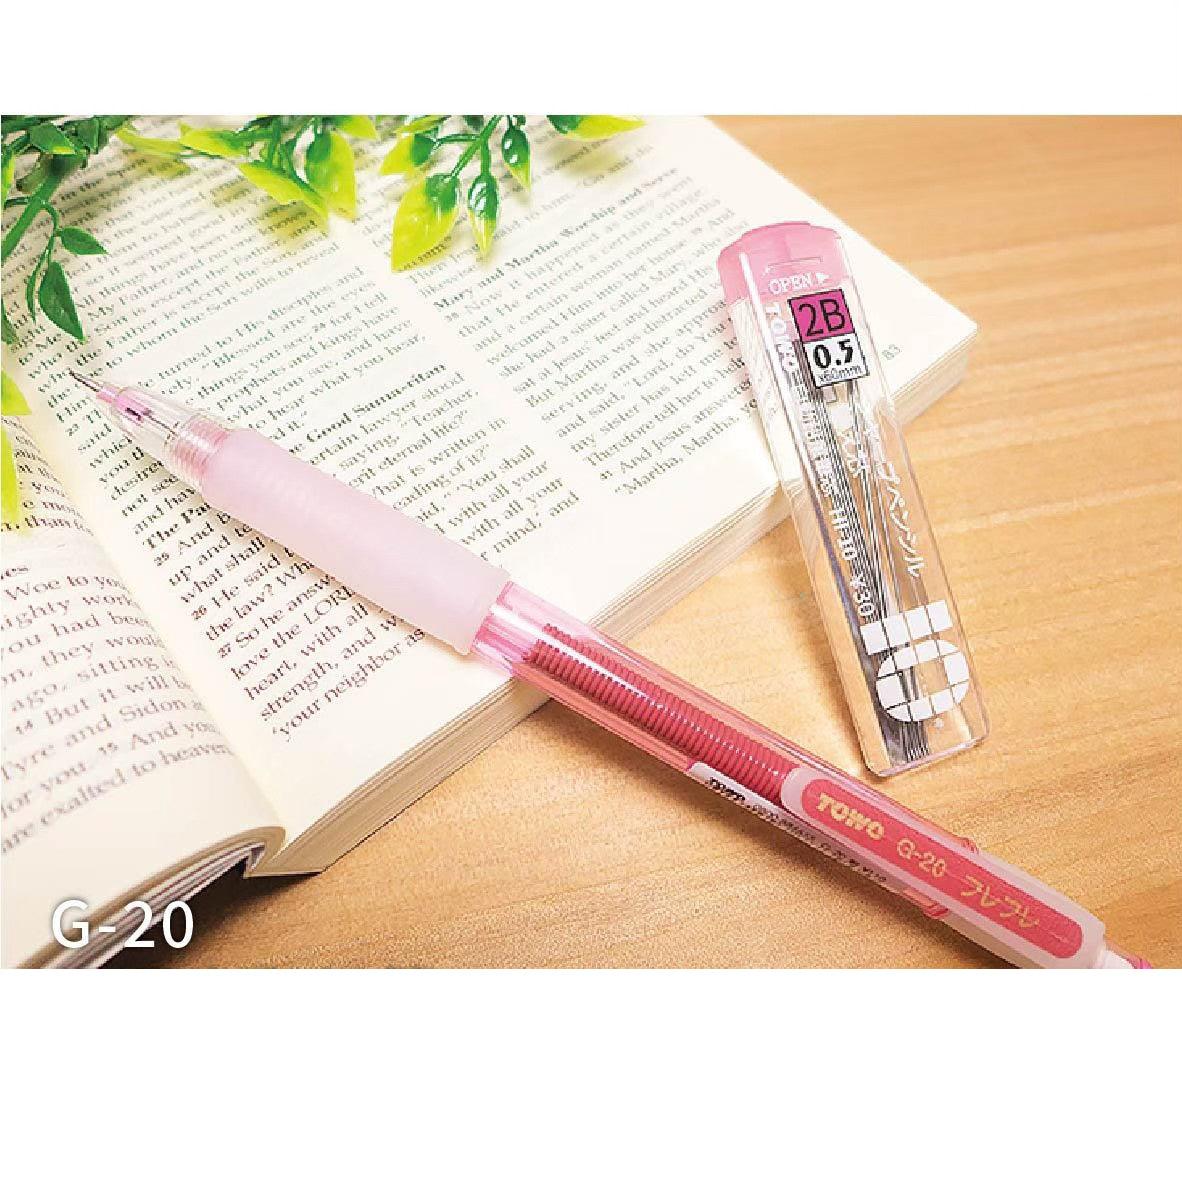 Mechanical Pencil + Refill TOWO Rocker Pen Stationery Student Teenager School Office' 0.5mm 2B Value Combination G-20 - CHL-STORE 